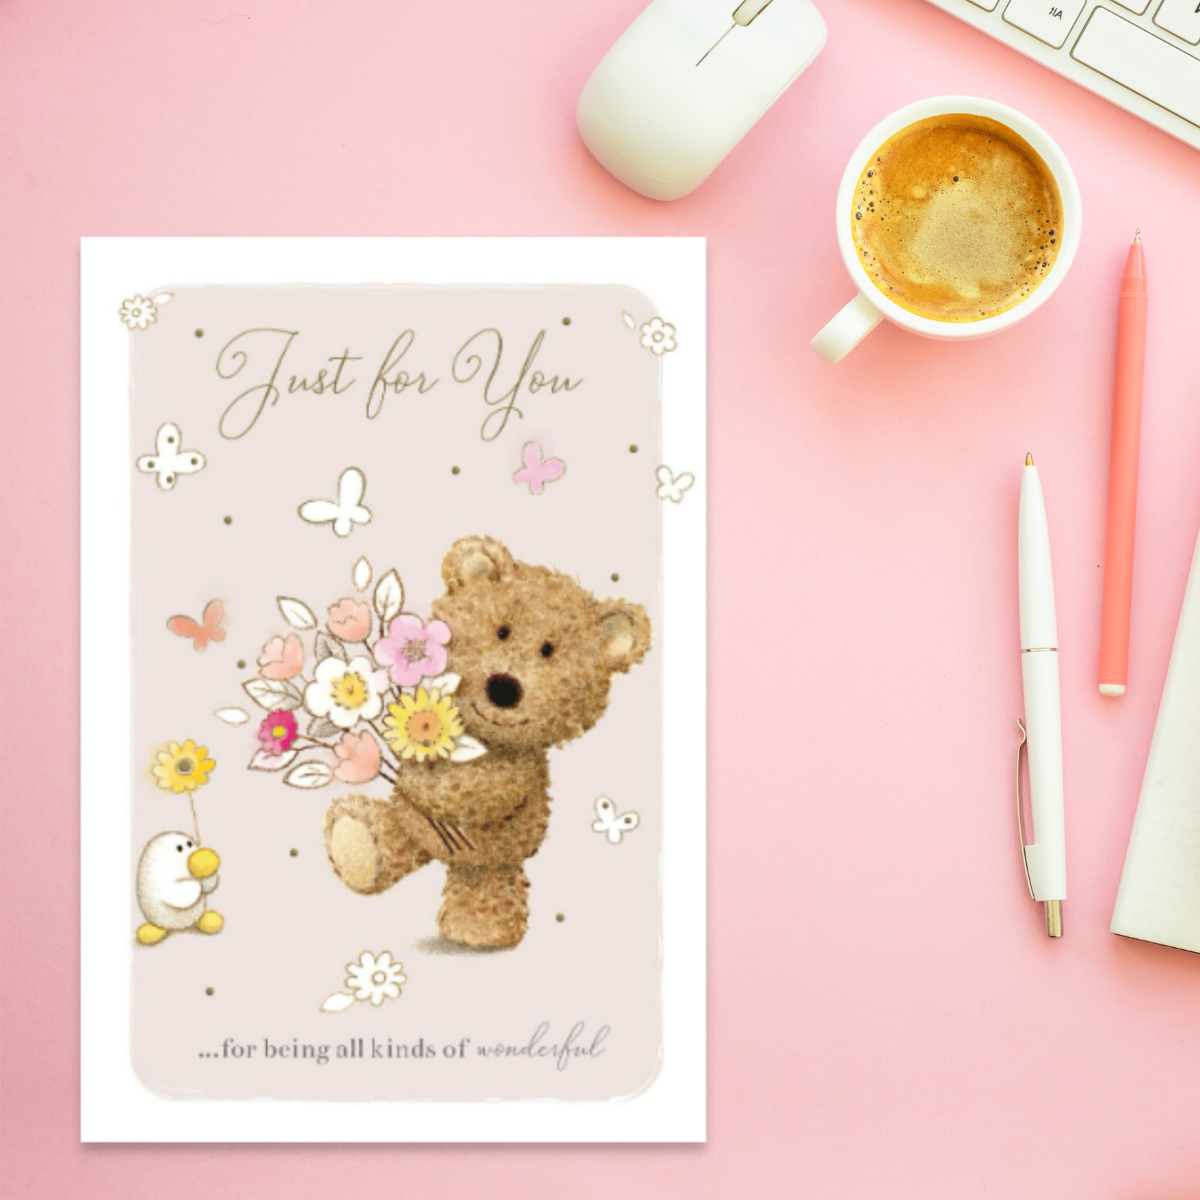 Cute Barley bear character holding a bunch of flowers with white border